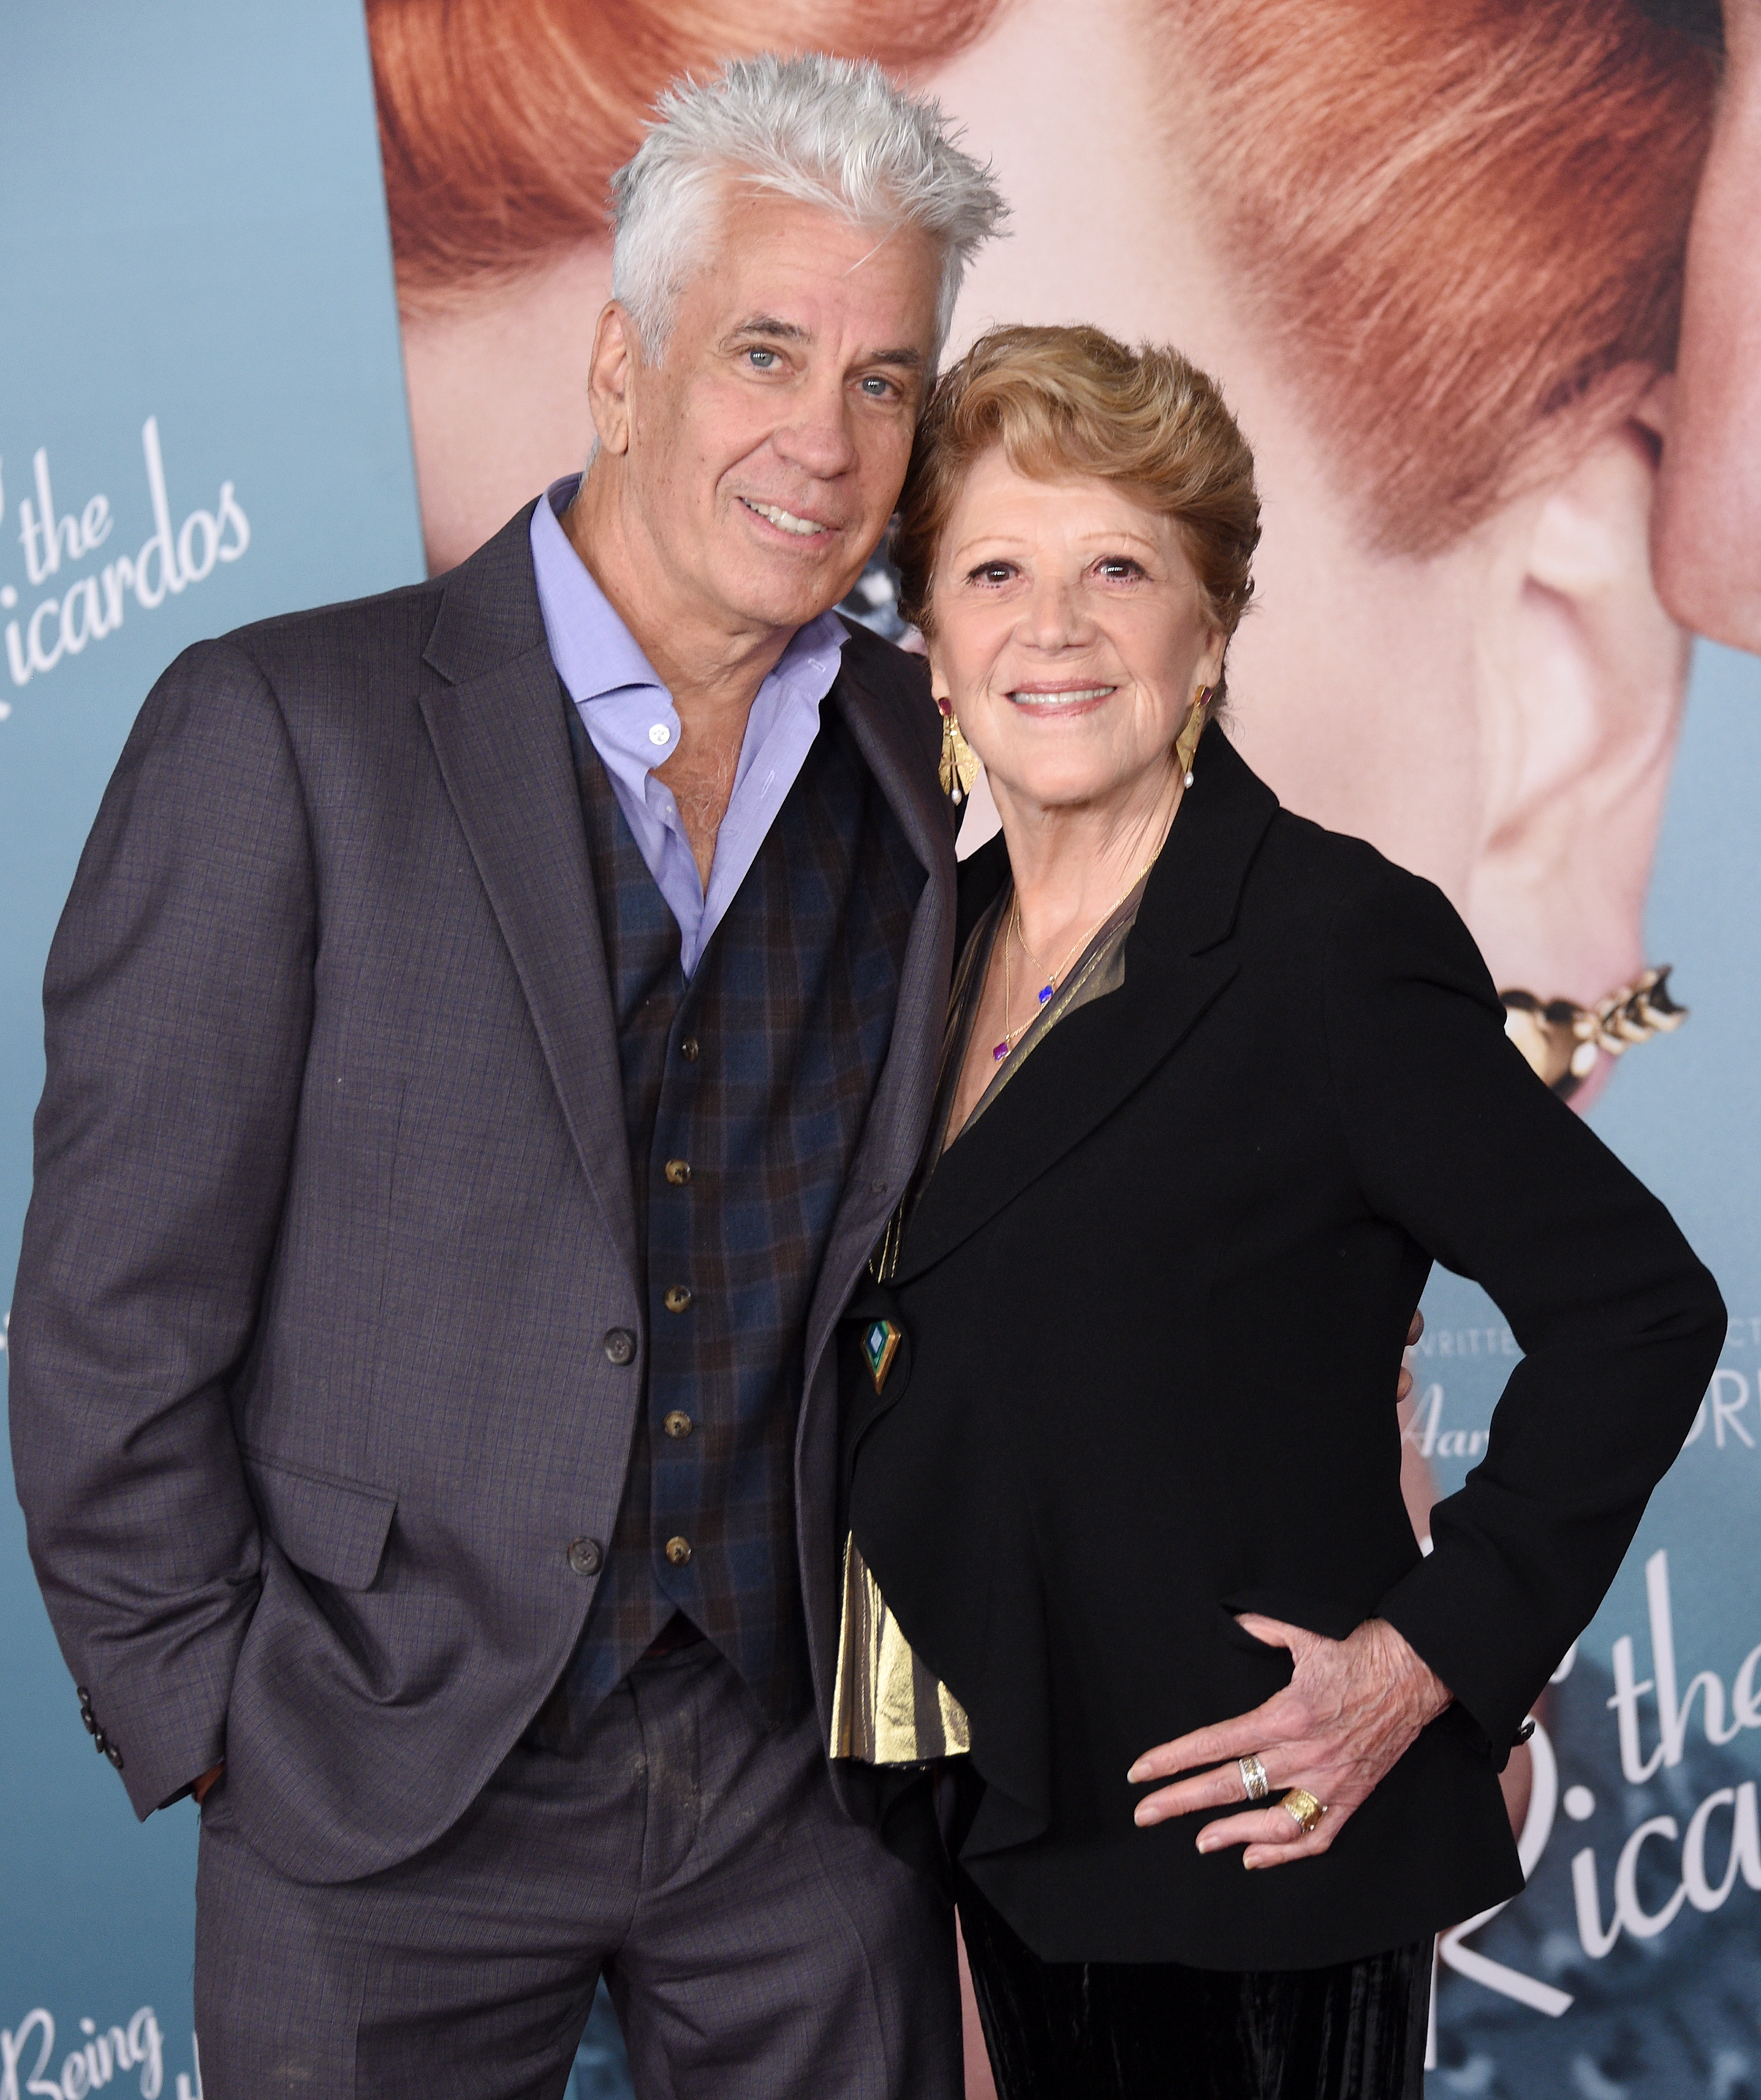 <p>"Alice" star Linda Lavin was 67 when she married third husband Steve Bakunas -- an actor, artist and musician who's 20 years her junior -- on Valentine's Day in 2005. The couple -- seen here at the December 2021 premiere of her film "Being the Ricardos" -- have worked together for more than two decades, collaborating on various performances, art shows and charity efforts and founding the Red Barn Studio Theater company in Wilmington, North Carolina, together.</p>